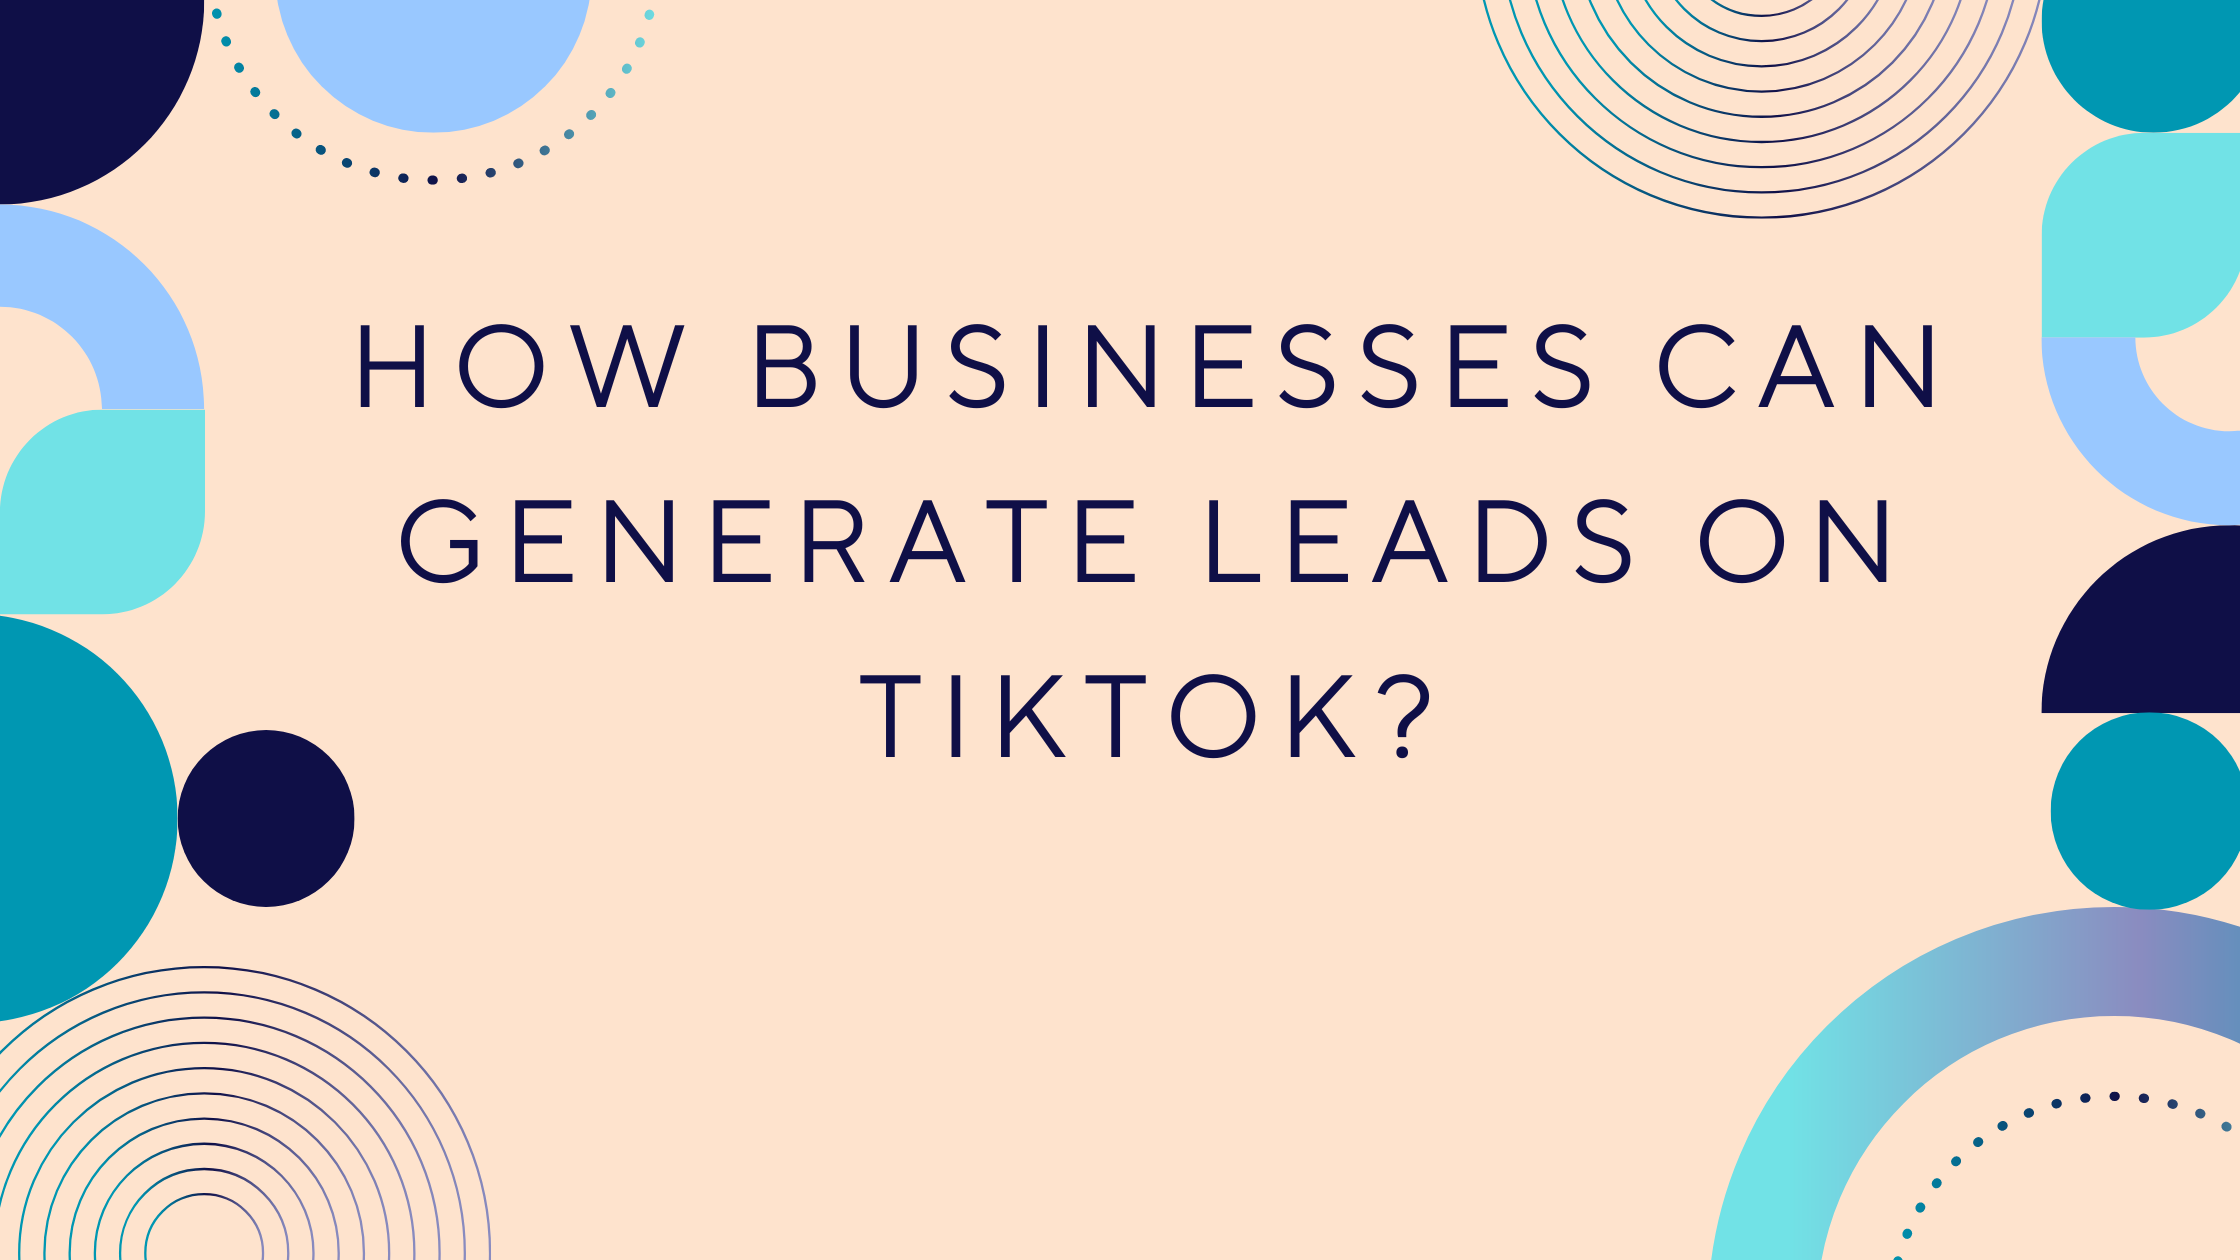 How Businesses Can Generate Leads on TikTok?